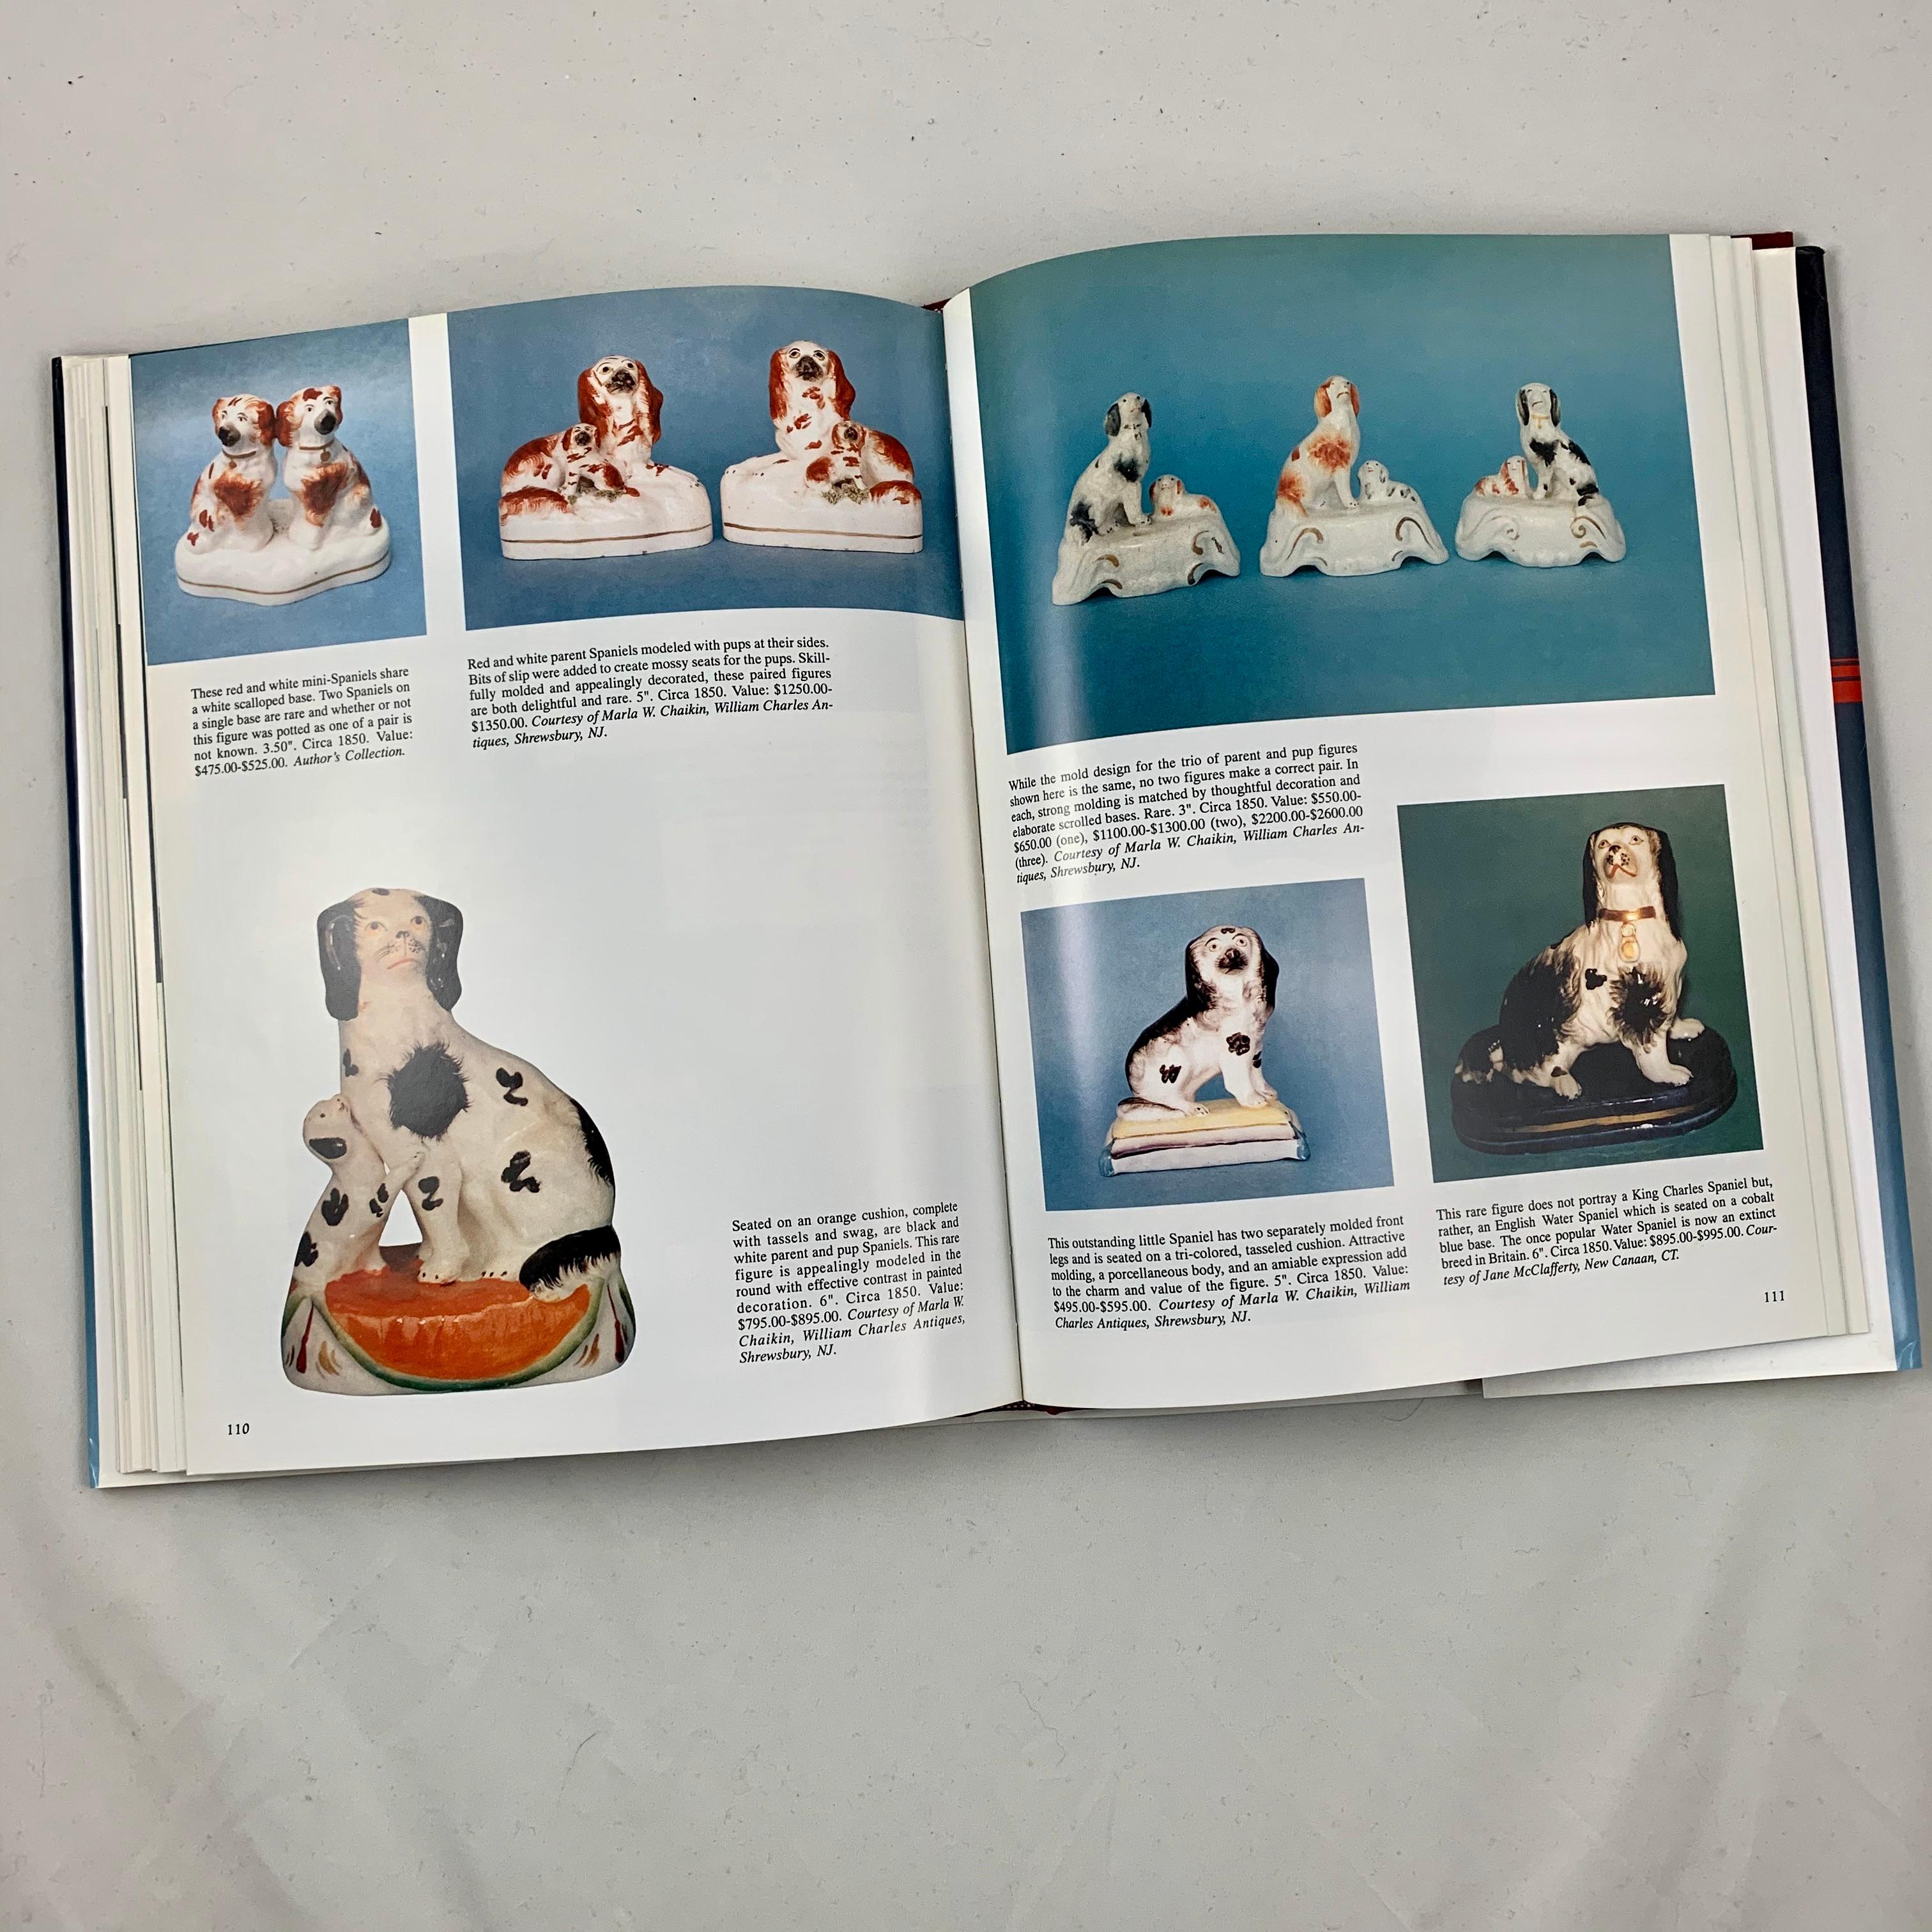 International Style Staffordshire Spaniels, a Collector’s Guide, by Adele Kenny, First Edition